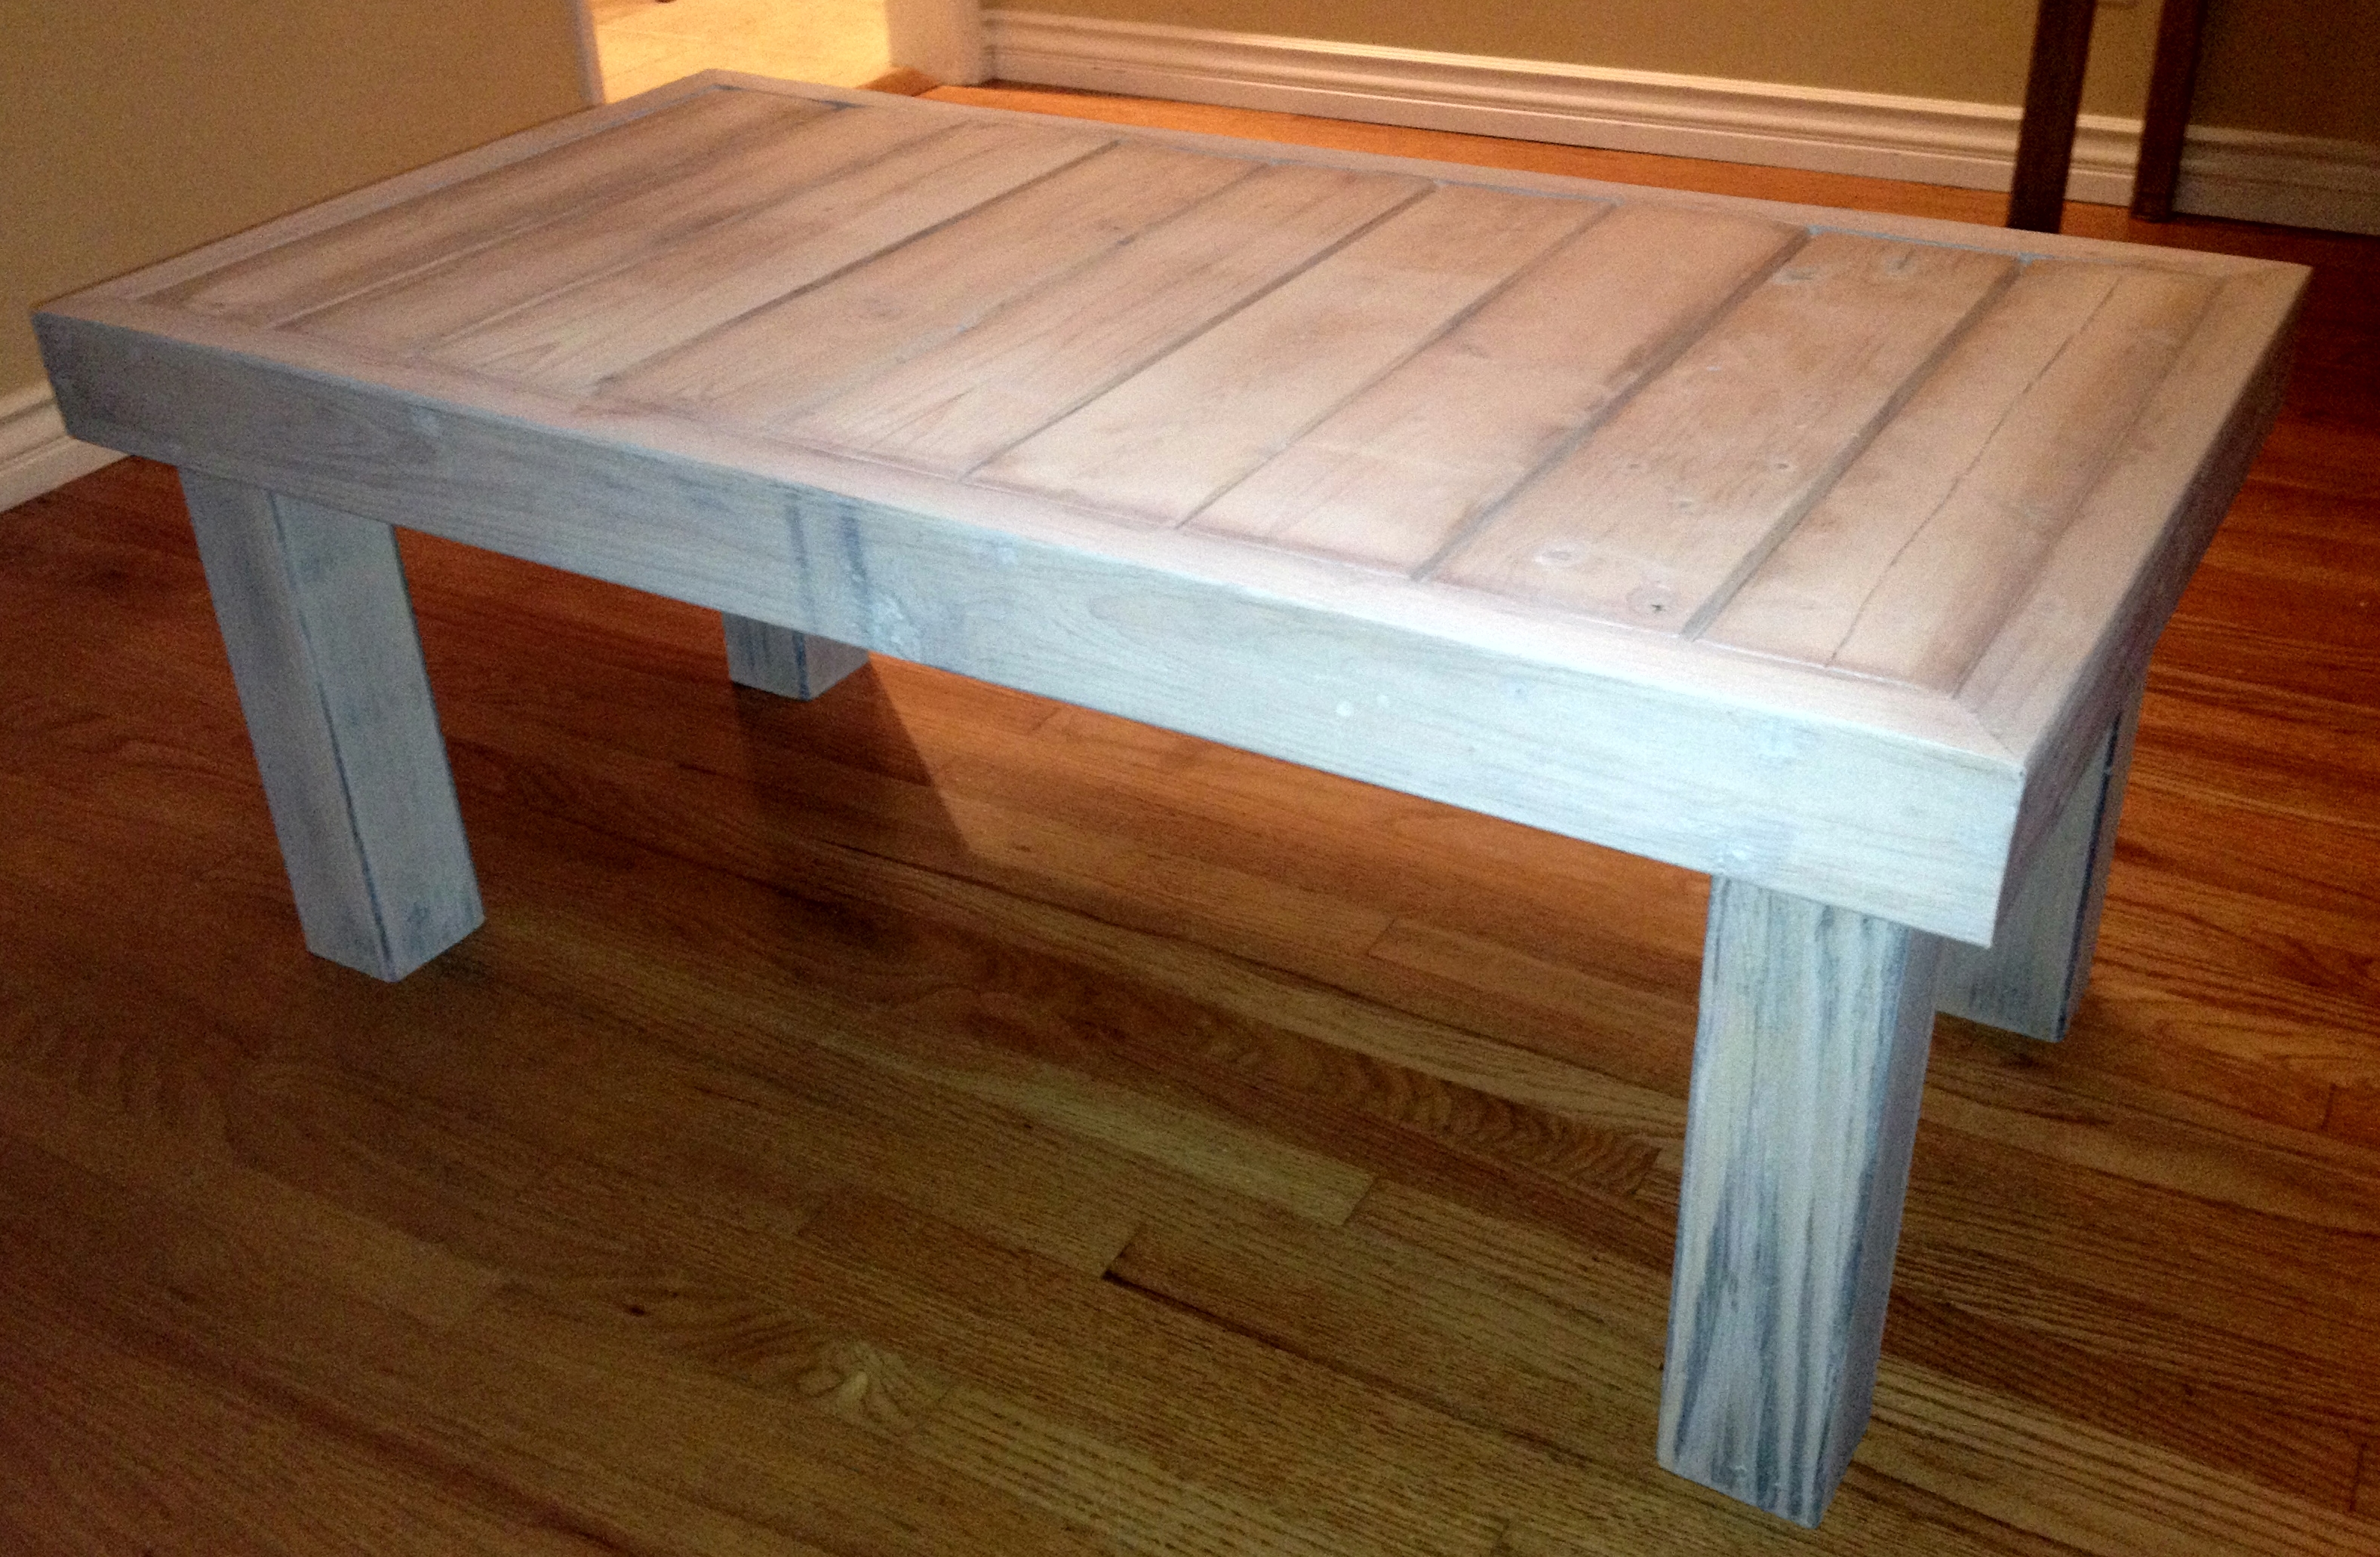 Reclaimed Wood Coffee Table Plans